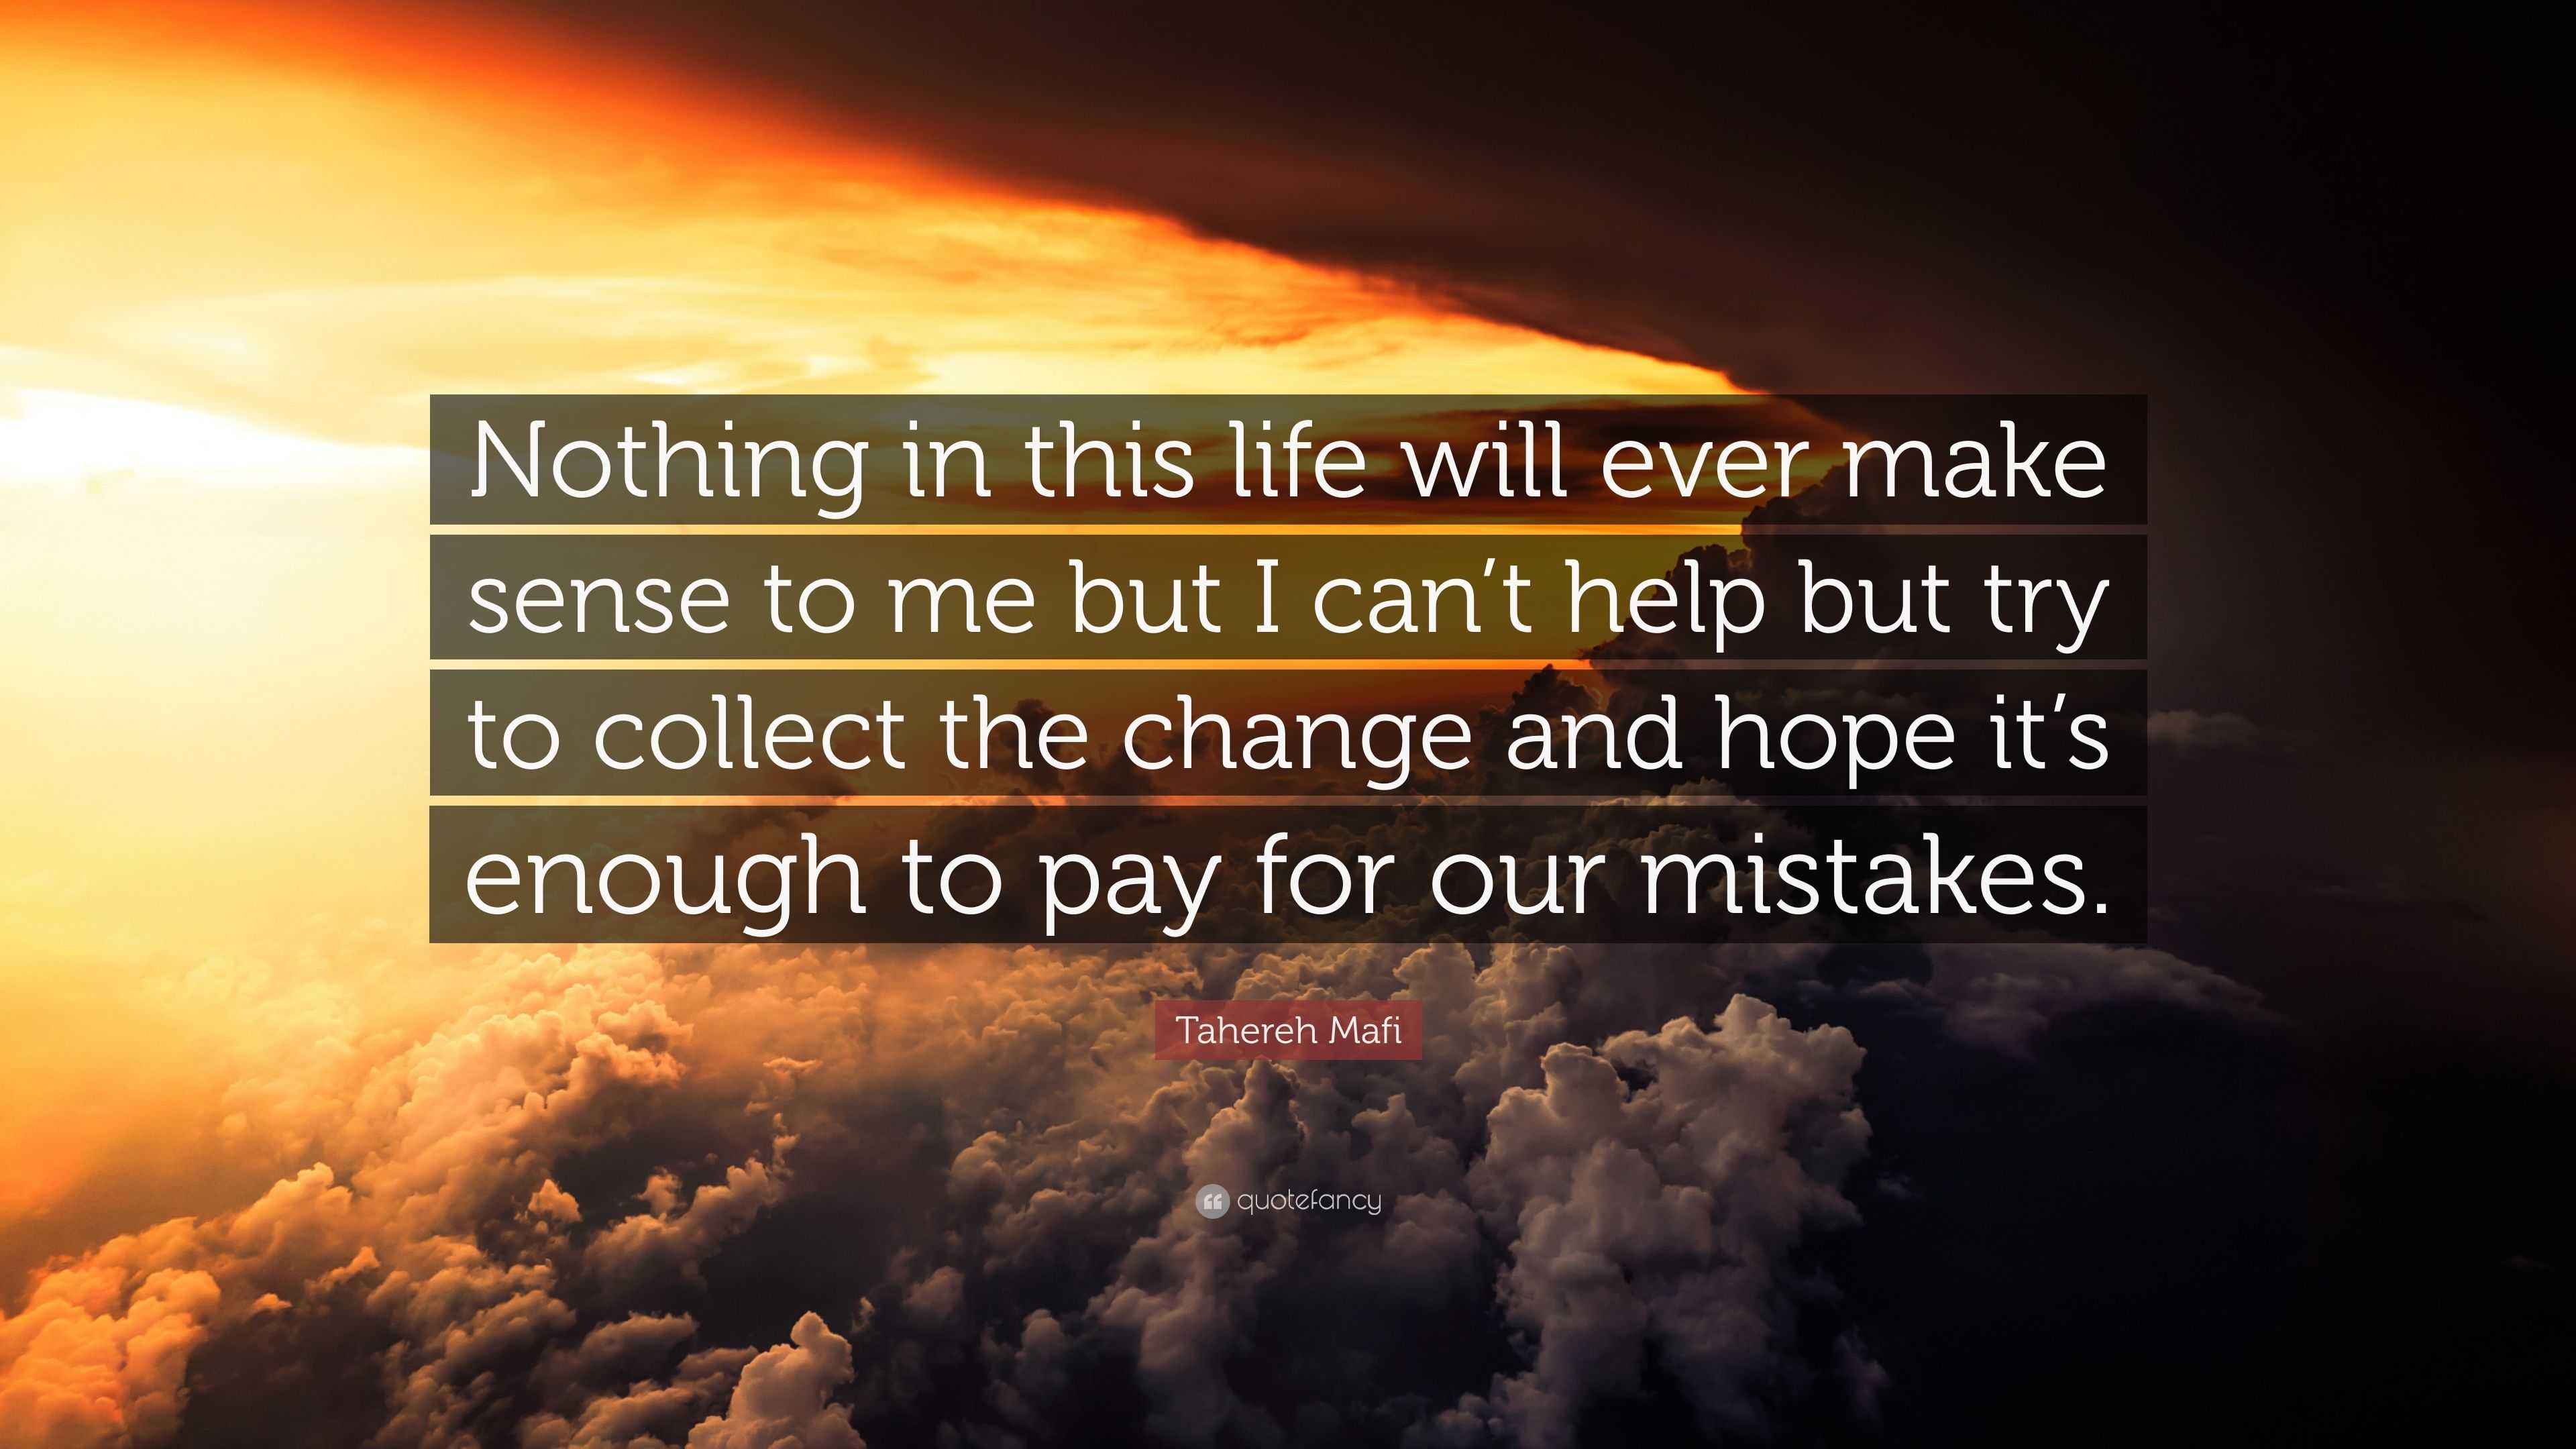 Tahereh Mafi Quote: “Nothing in this life will ever make sense to me ...